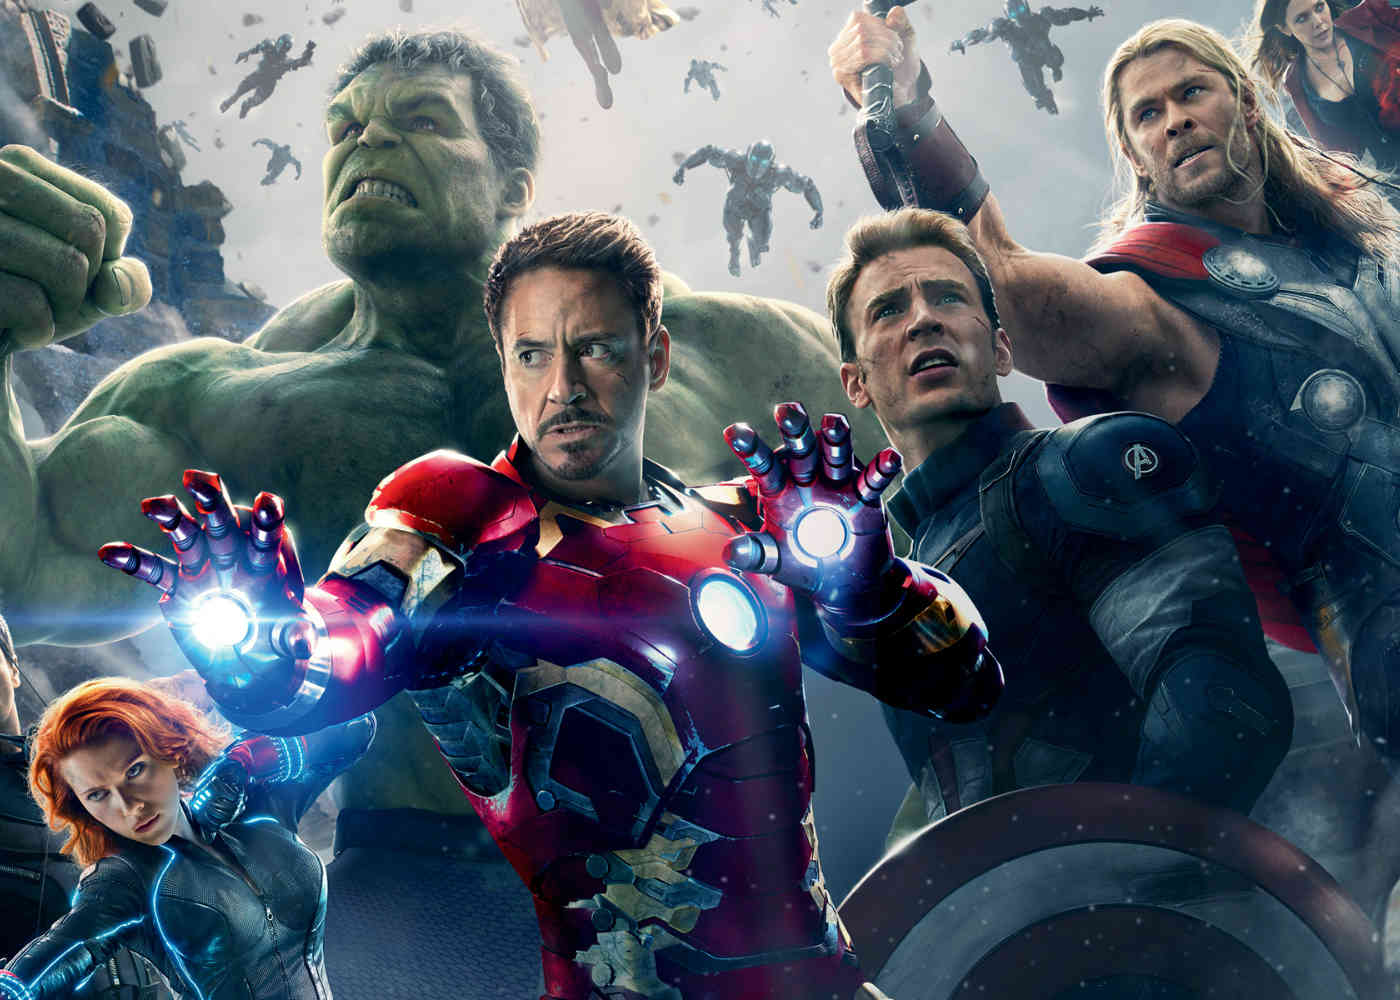 Avengers: Infinity War will be Unlike any Other Comic Book Movie According to Kevin Feige